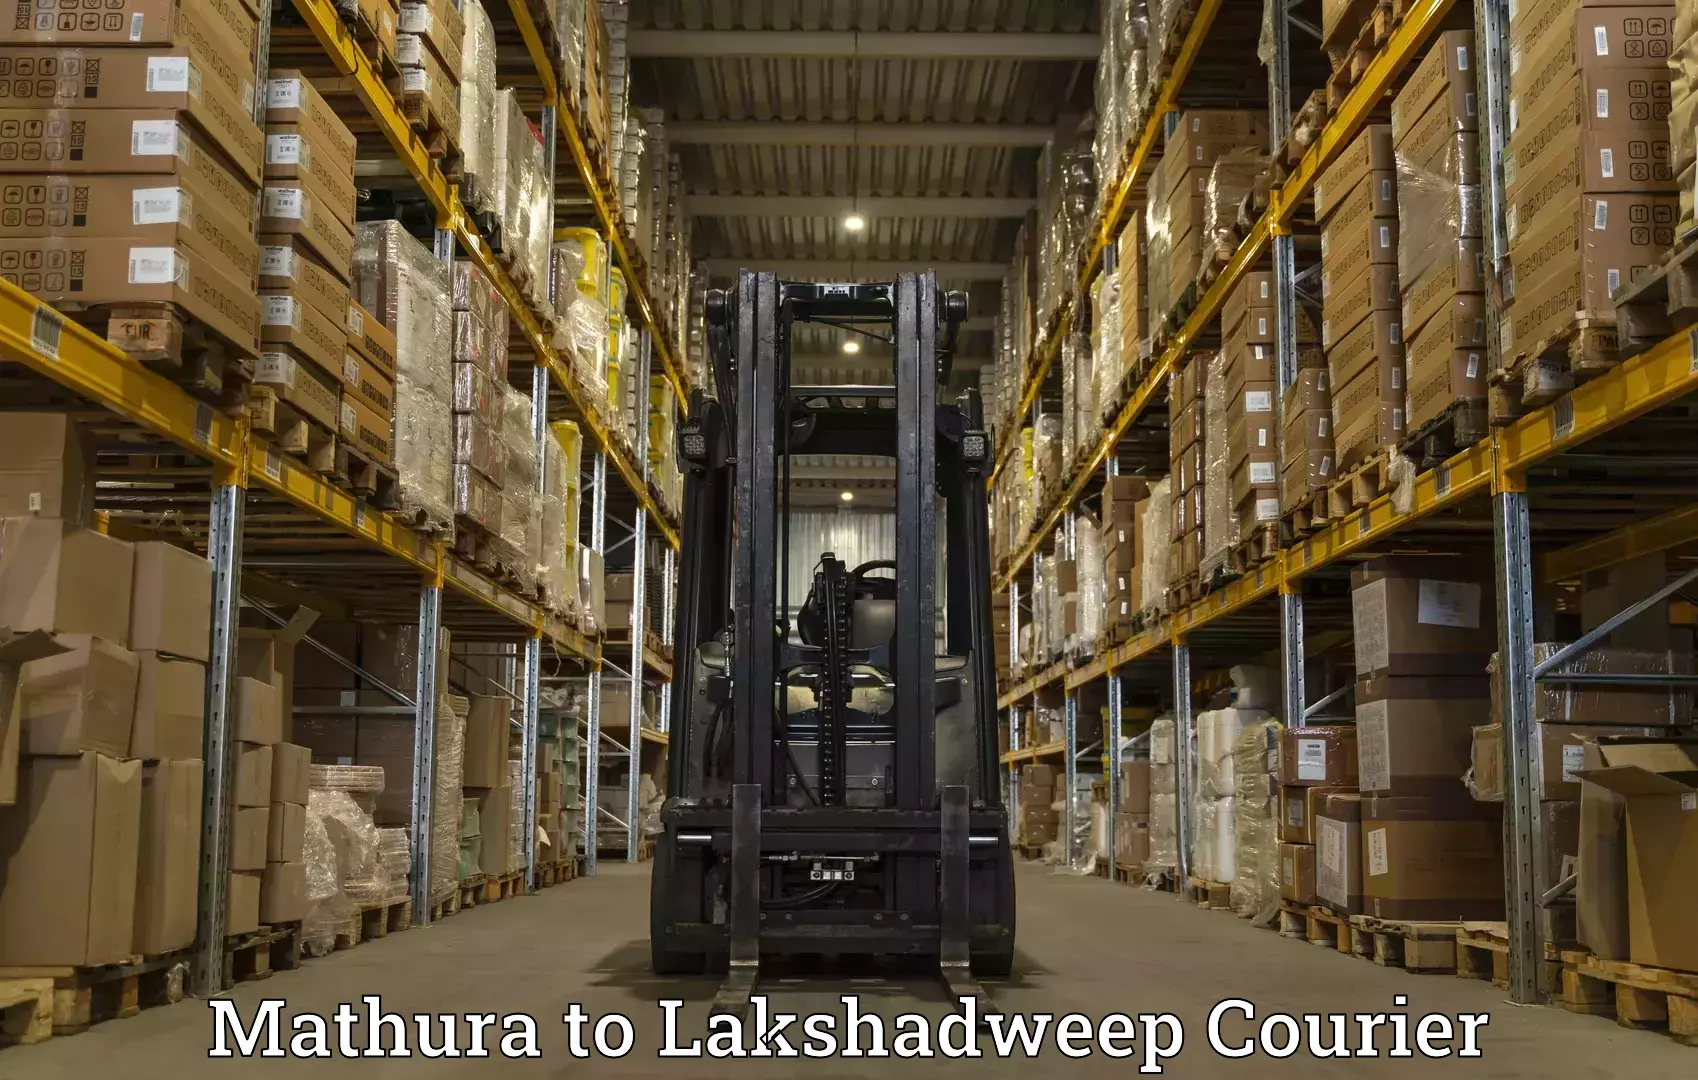 Business delivery service Mathura to Lakshadweep